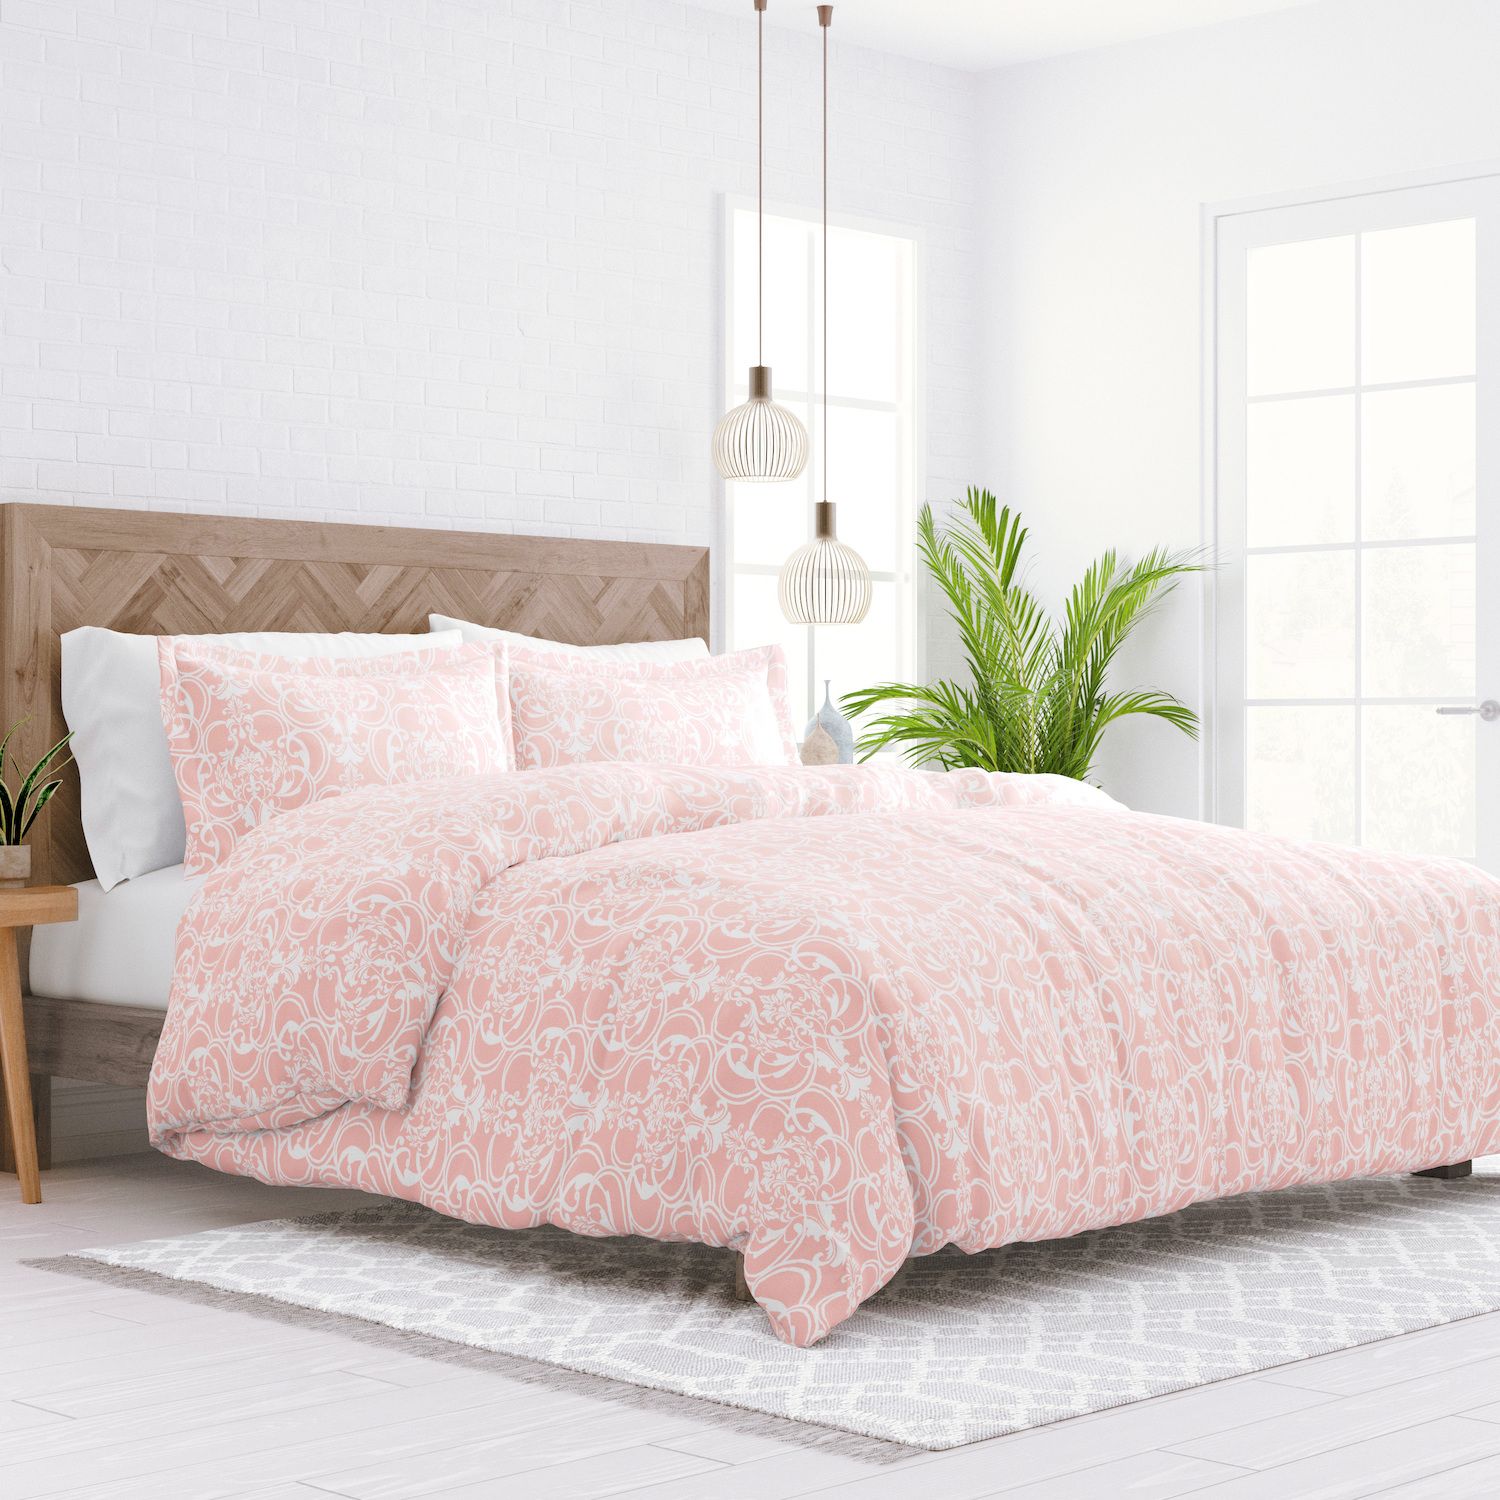 Image for Home Collection Premium Ultra Soft Romantic Damask Pattern Duvet Cover Set at Kohl's.